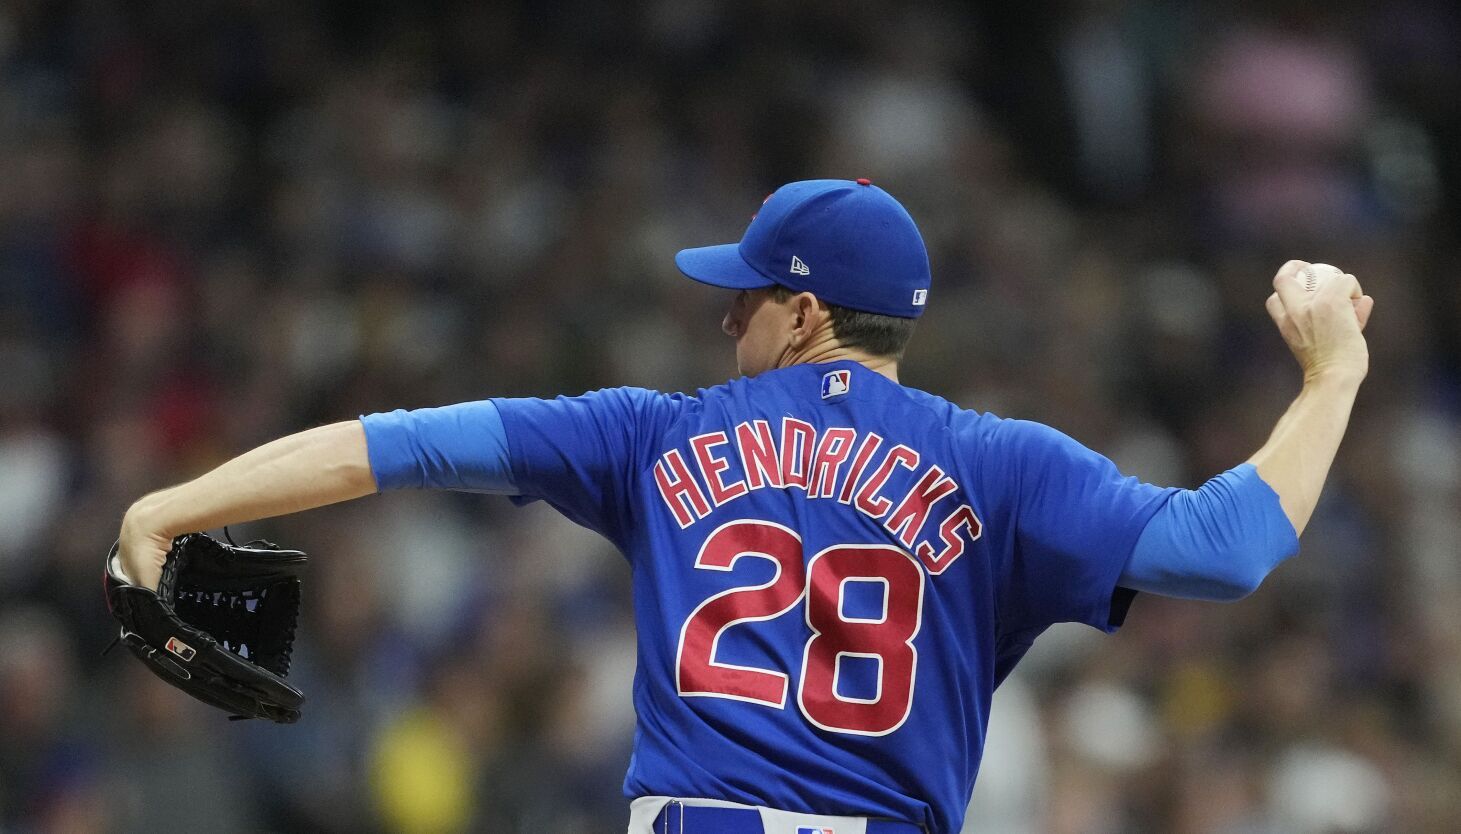 Too little, too late: Cubs' offense surges in meaningless 10-6 win